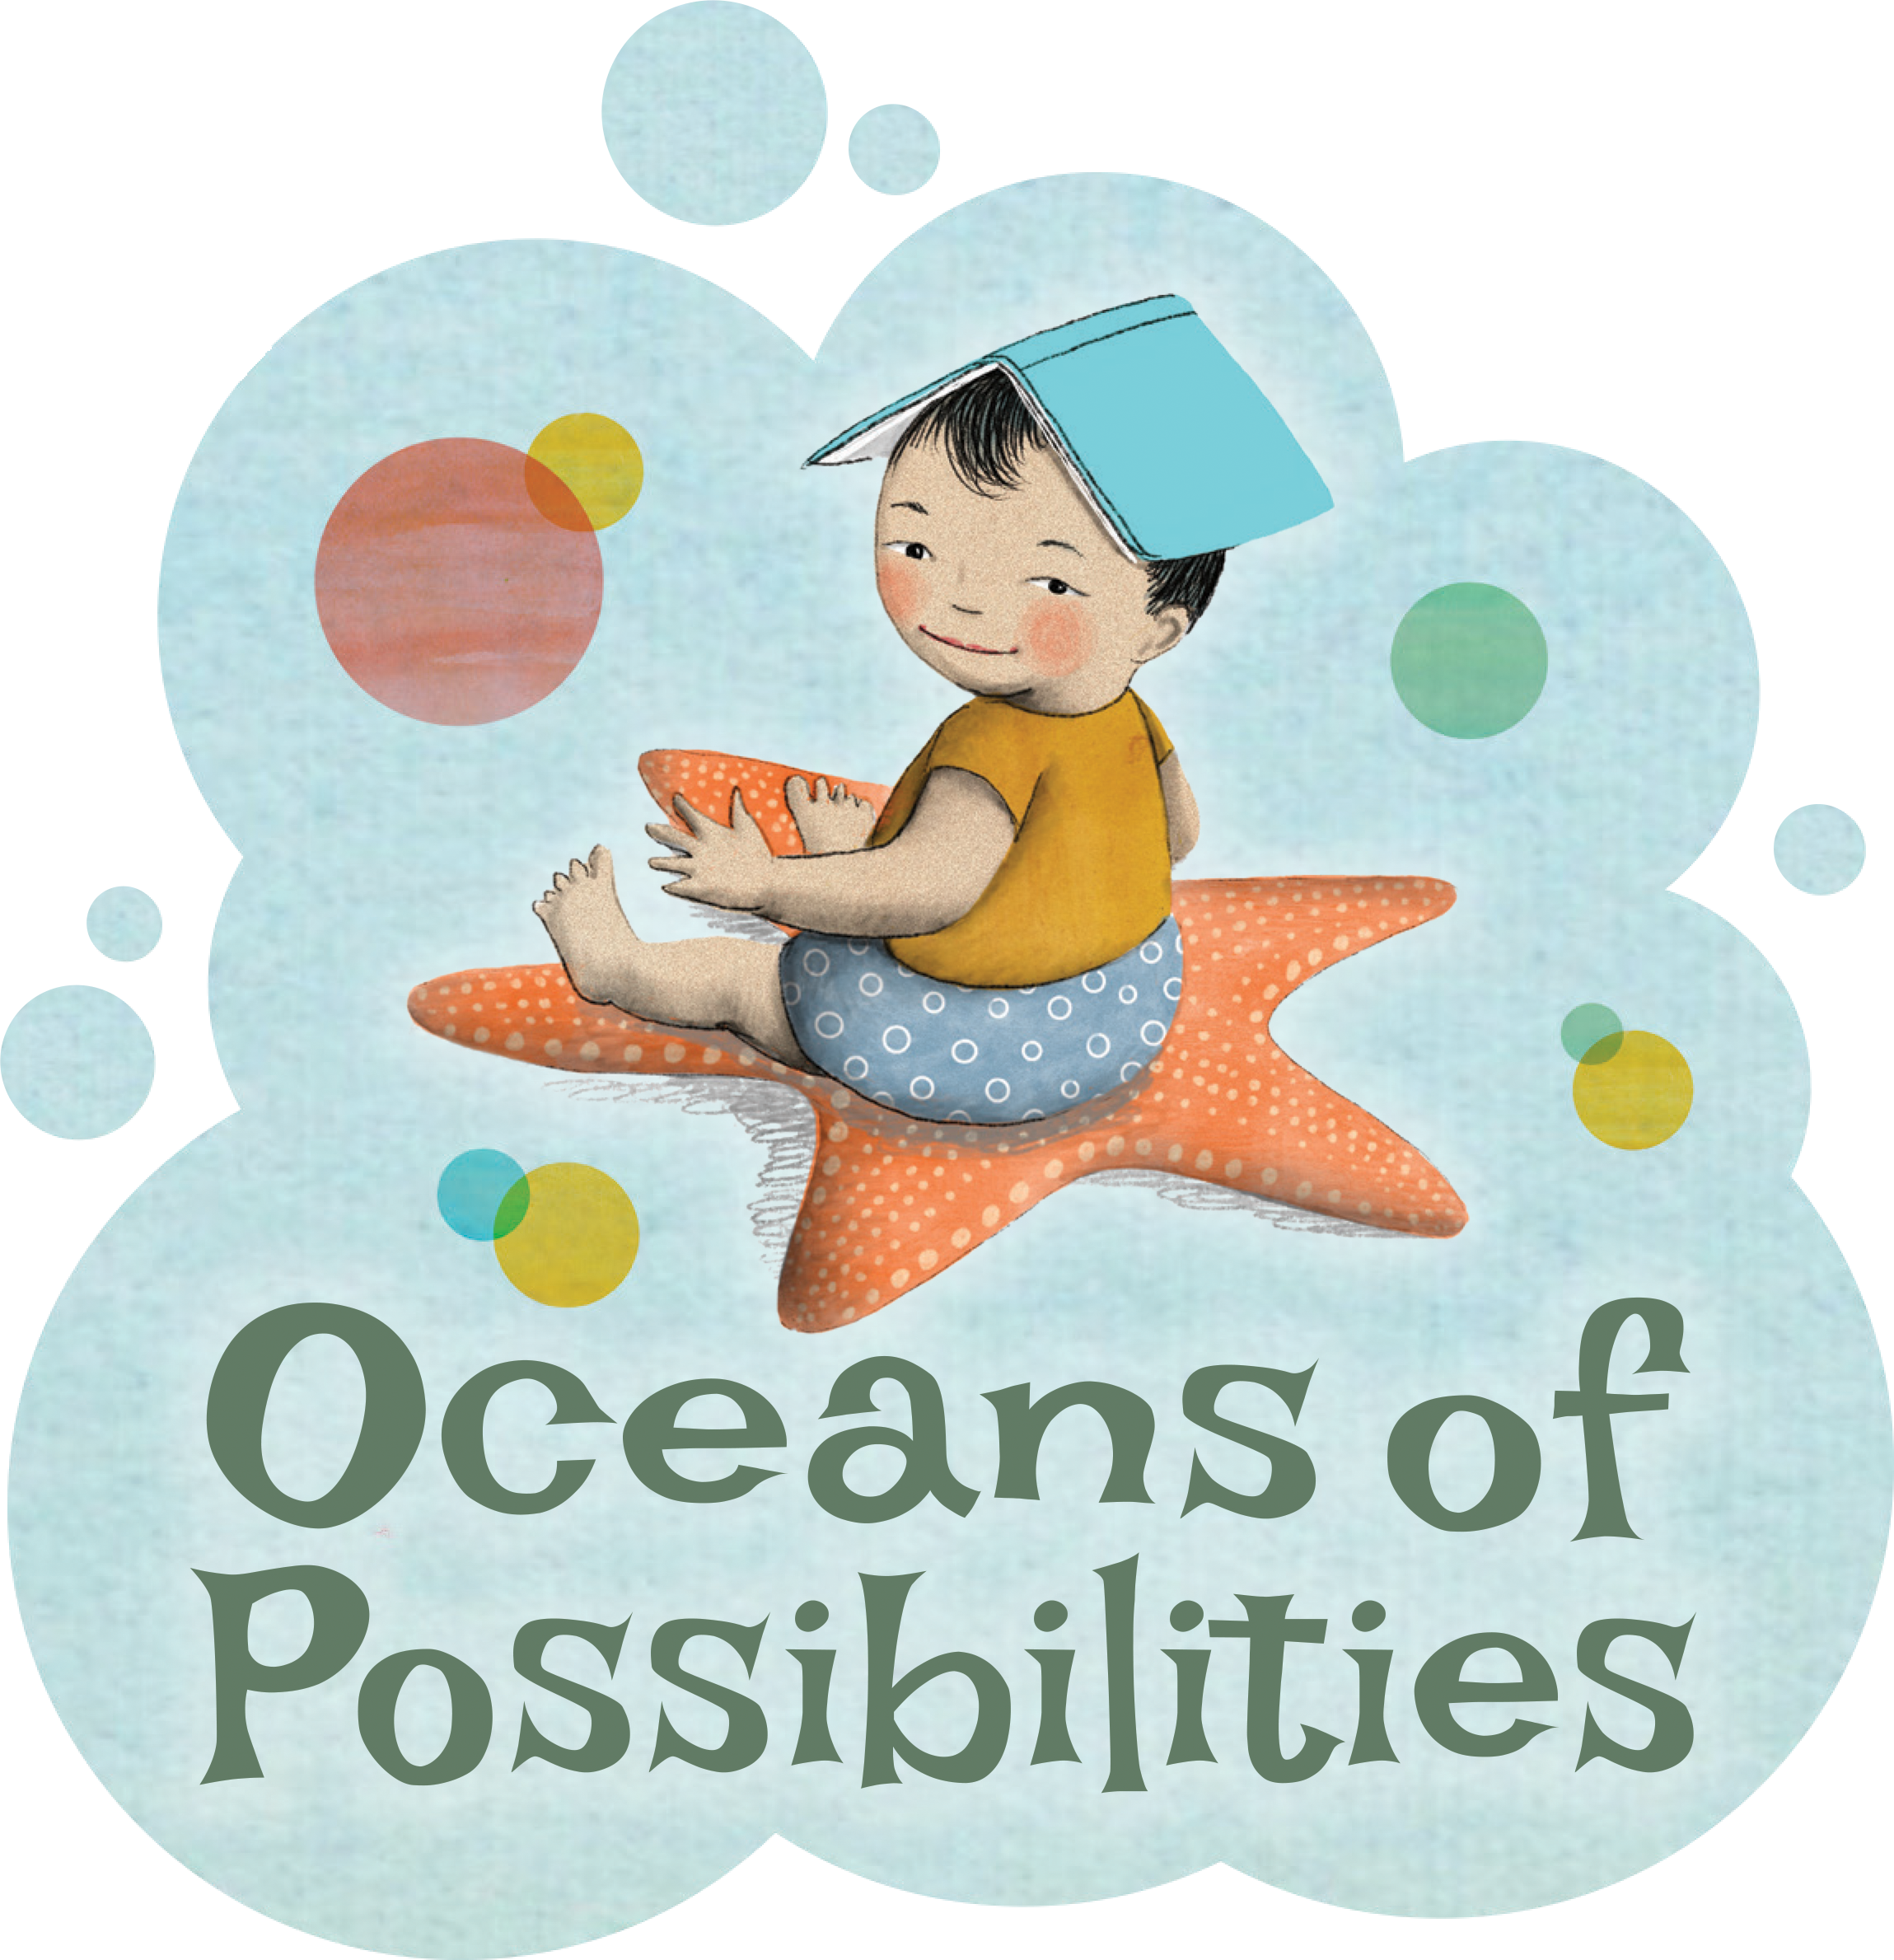 Oceans of Possibilities - A child sitting on a starfish